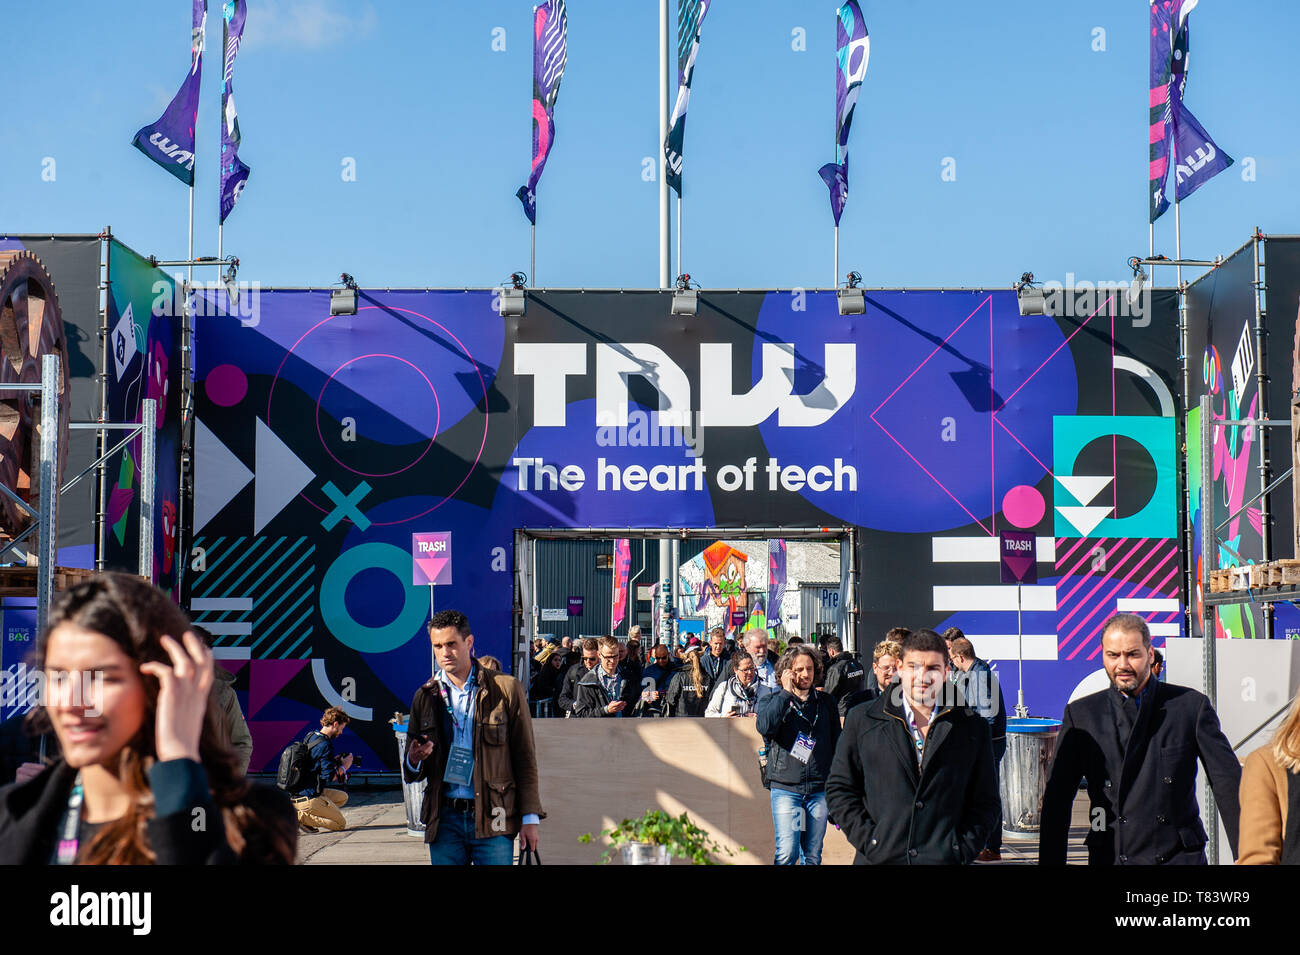 People seen arriving at the TNW venue conference. The 14th edition of the  TNW (The Next Web) conference was inaugurated in Amsterdam at the NDSM, a  creative hub for artists and entrepreneurs.